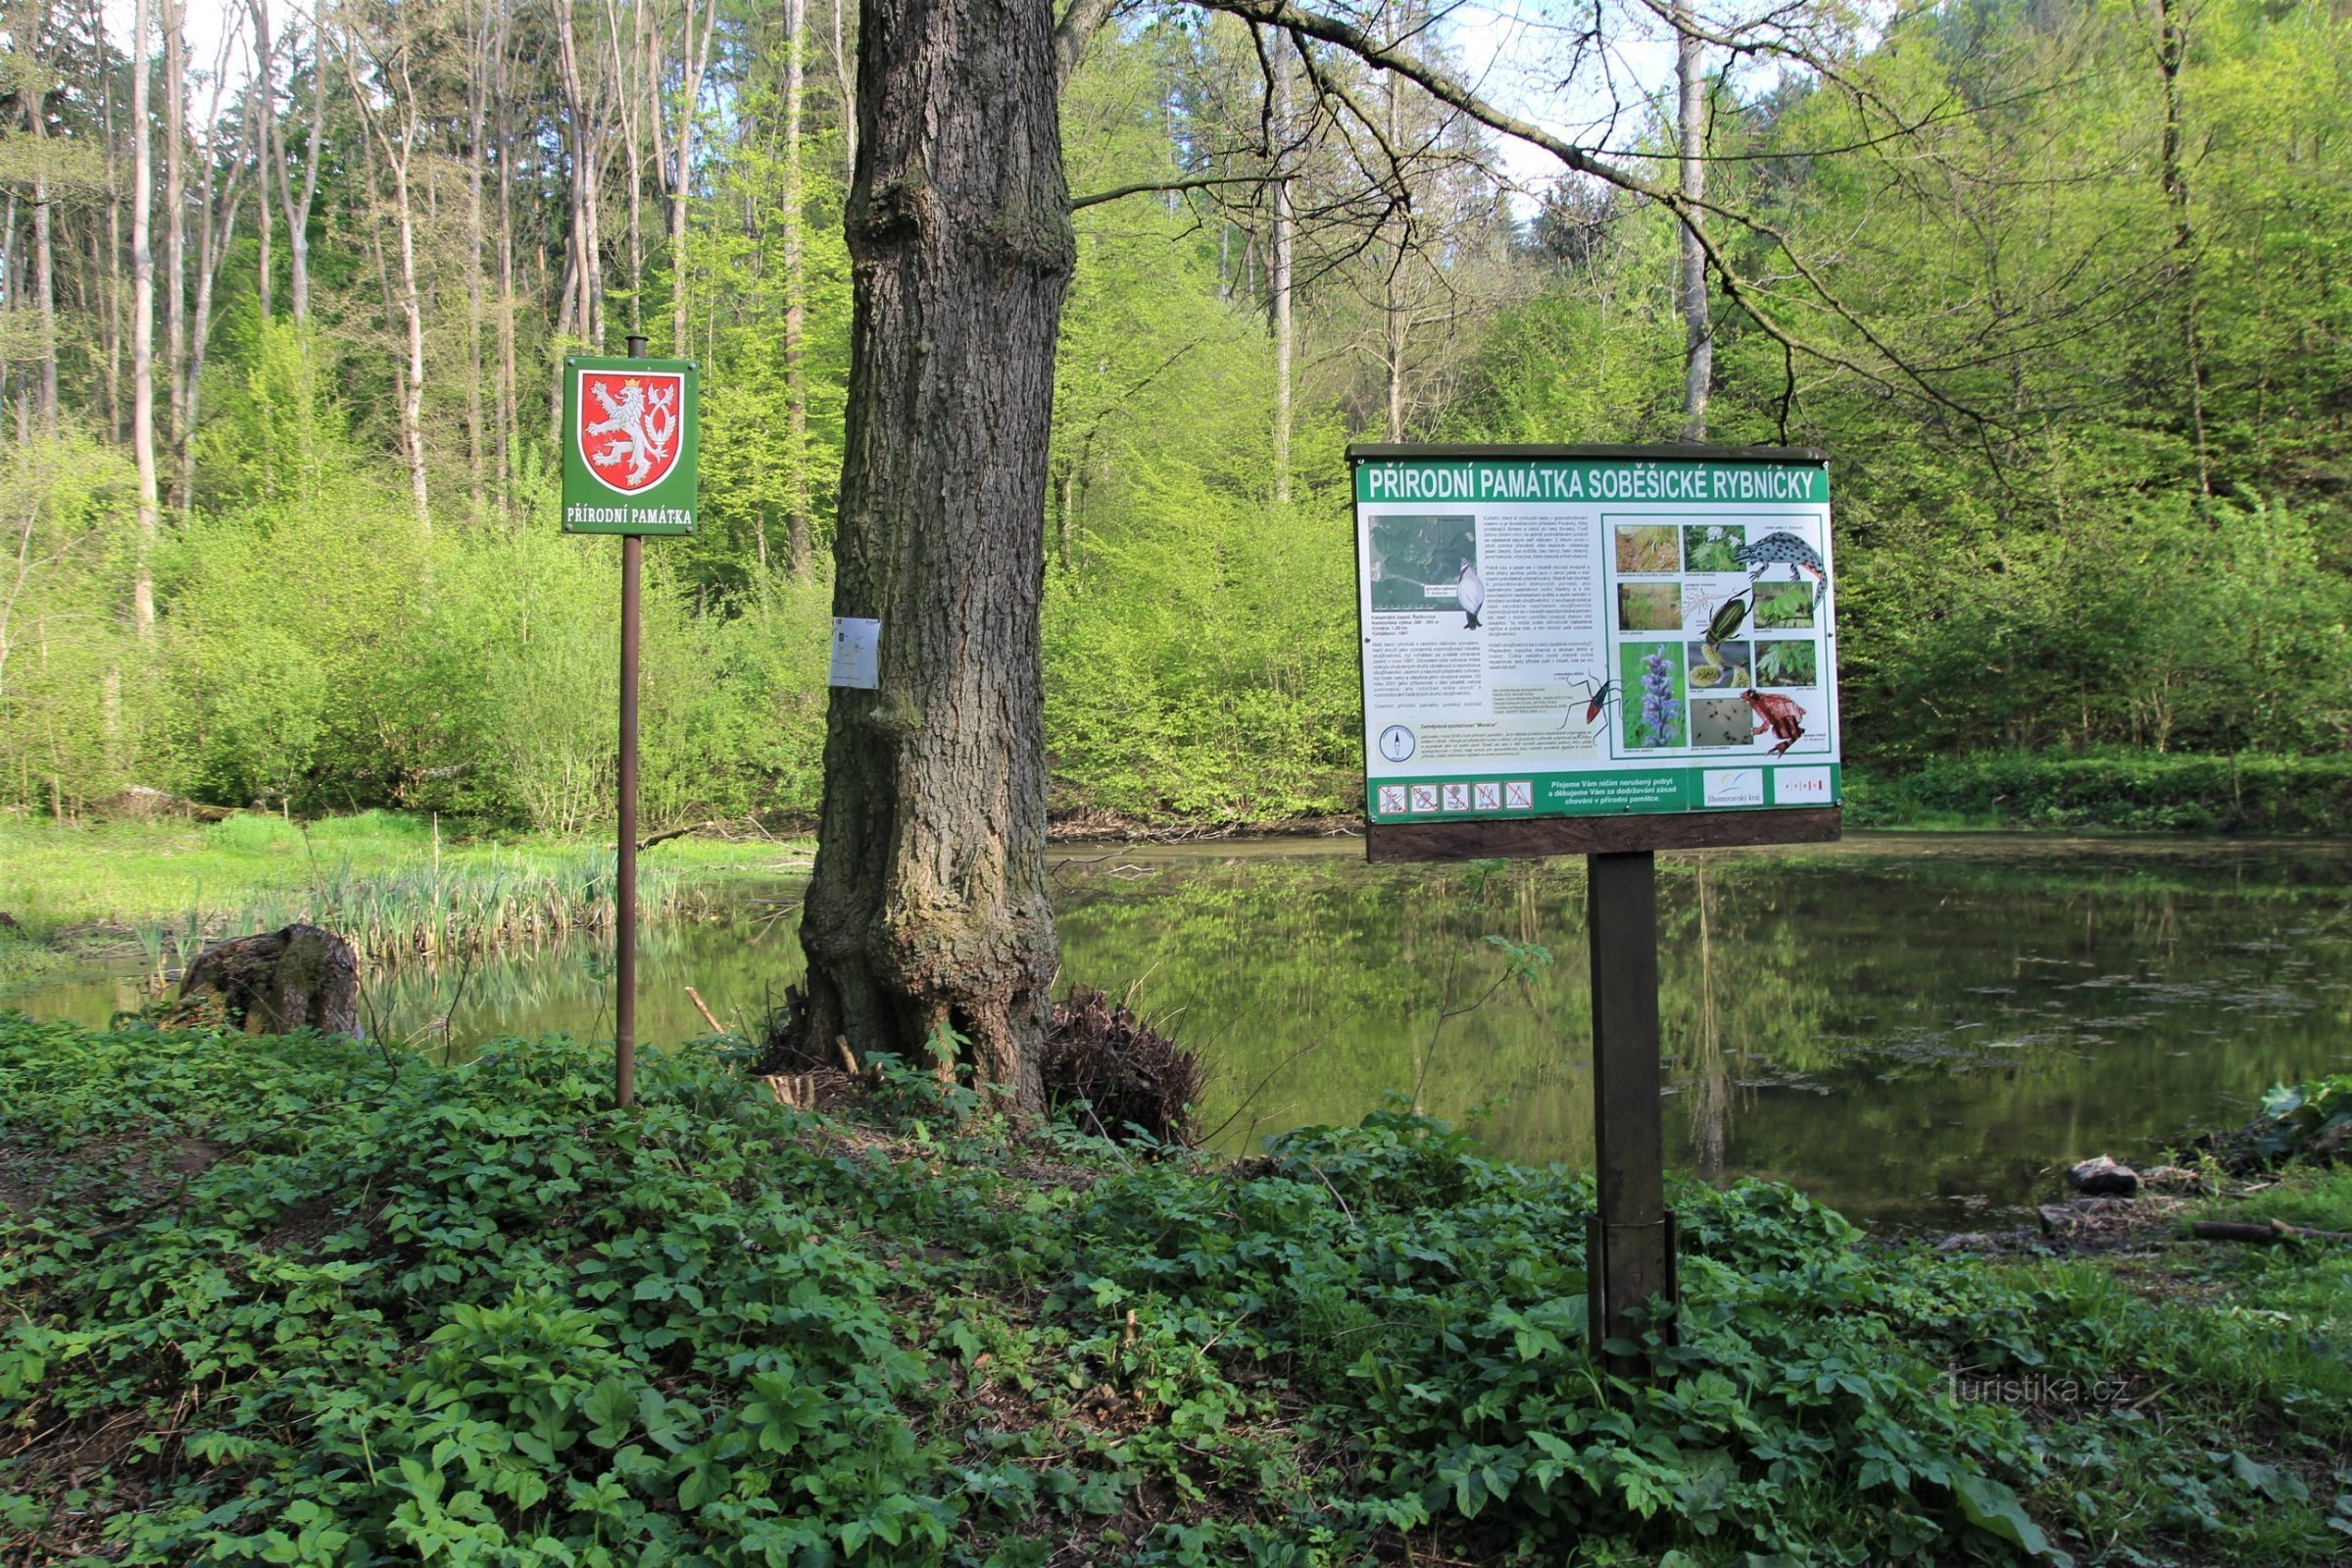 The central part of the natural monument in the vicinity of the pond with the national emblem and a description of the territory